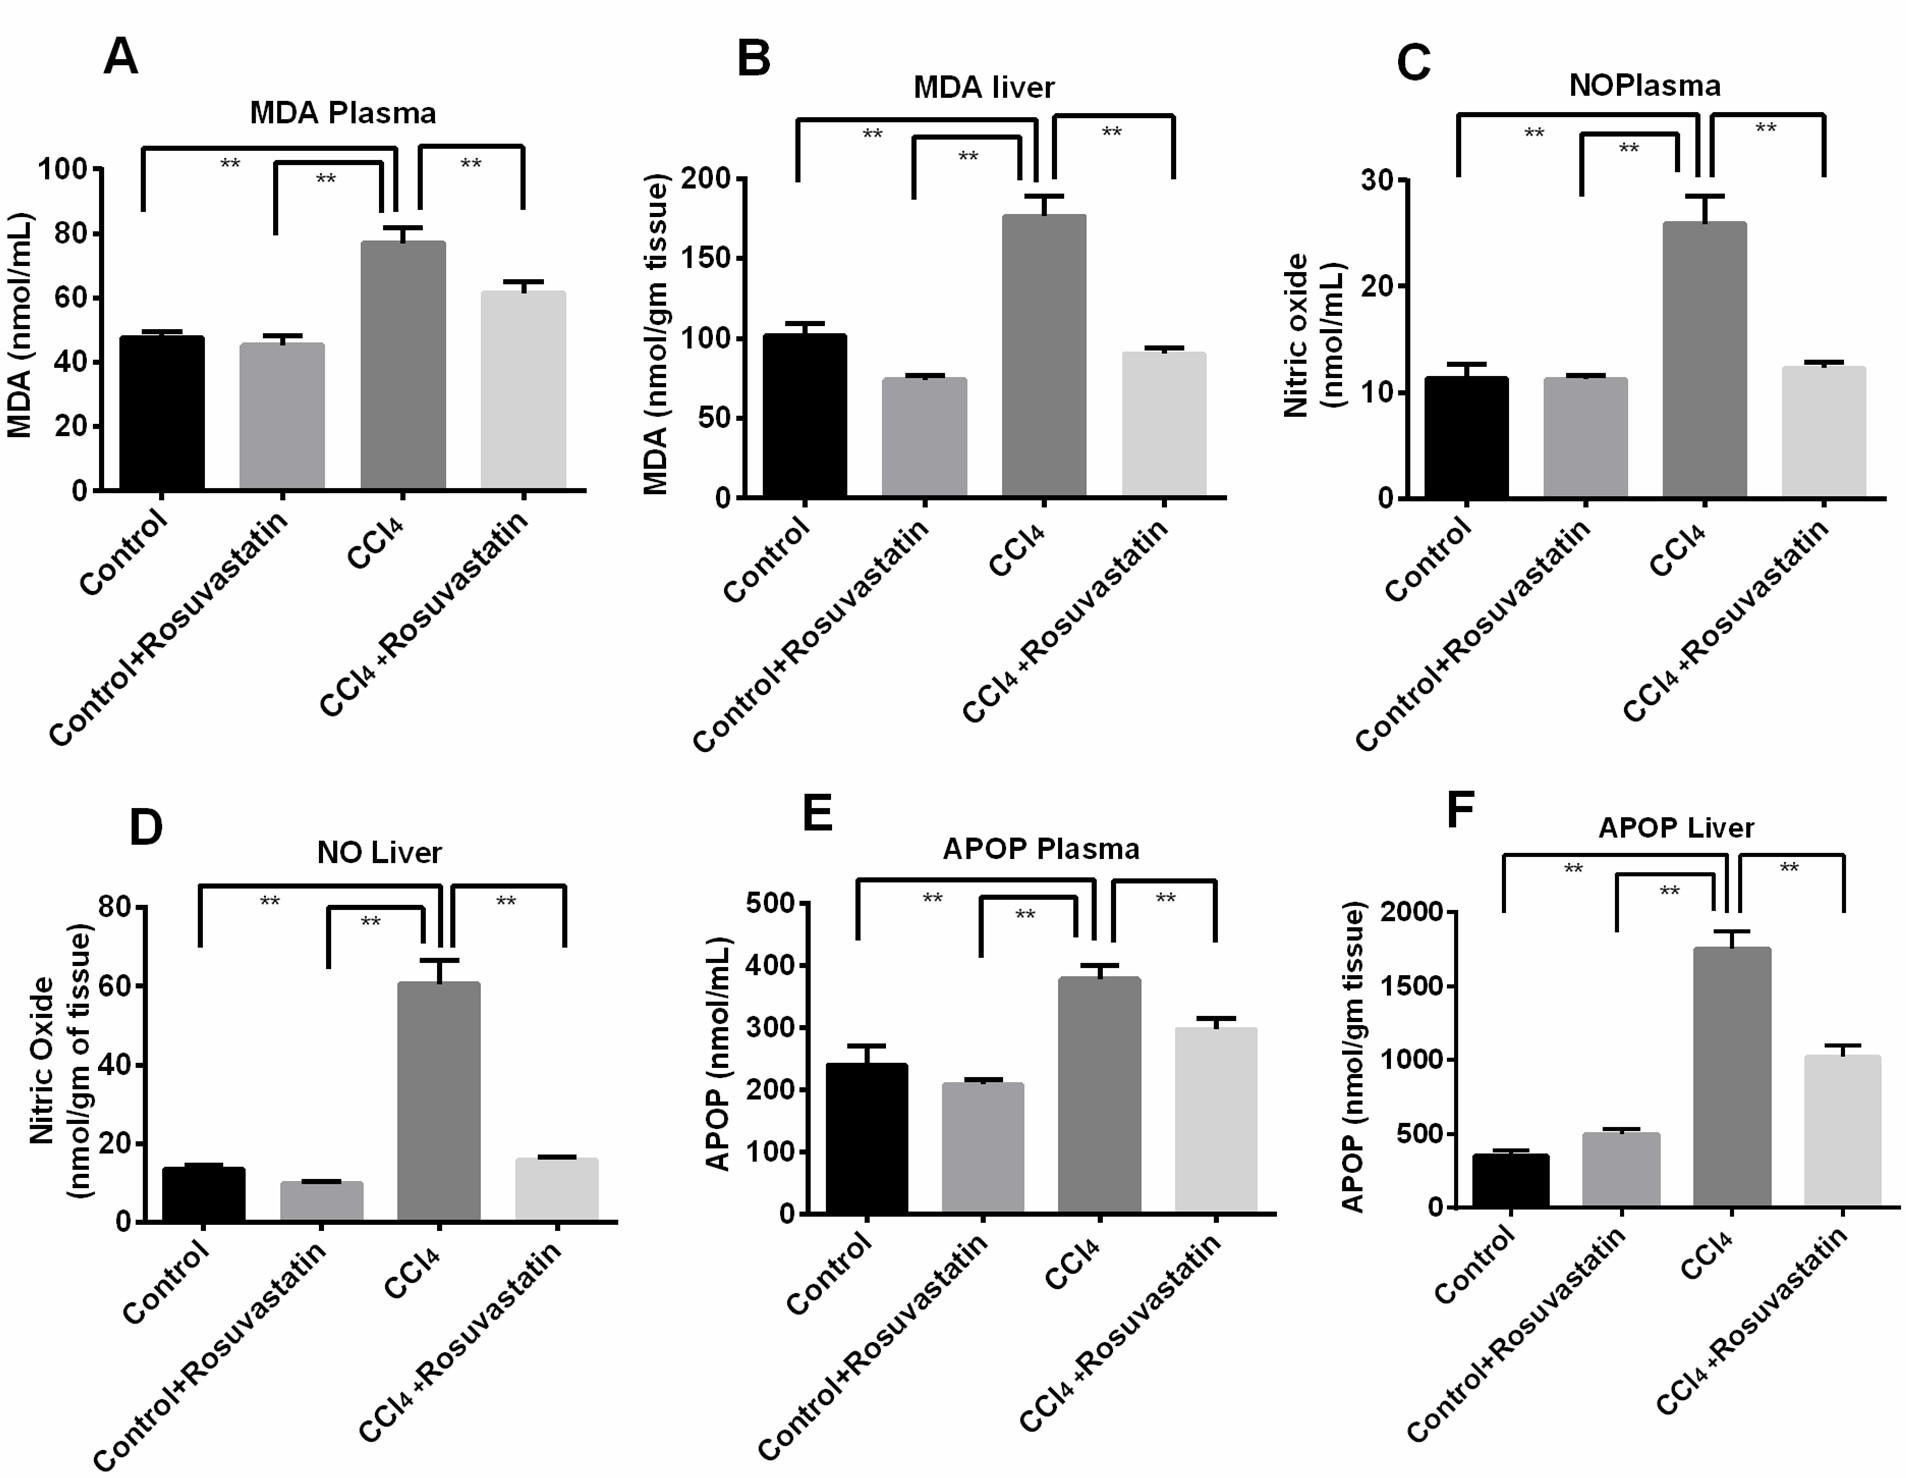 HMG-CoA reductase inhibitor, rosuvastatin averted carbon tetrachloride-induced oxidative stress, inflammation and fibrosis in the liver of rats